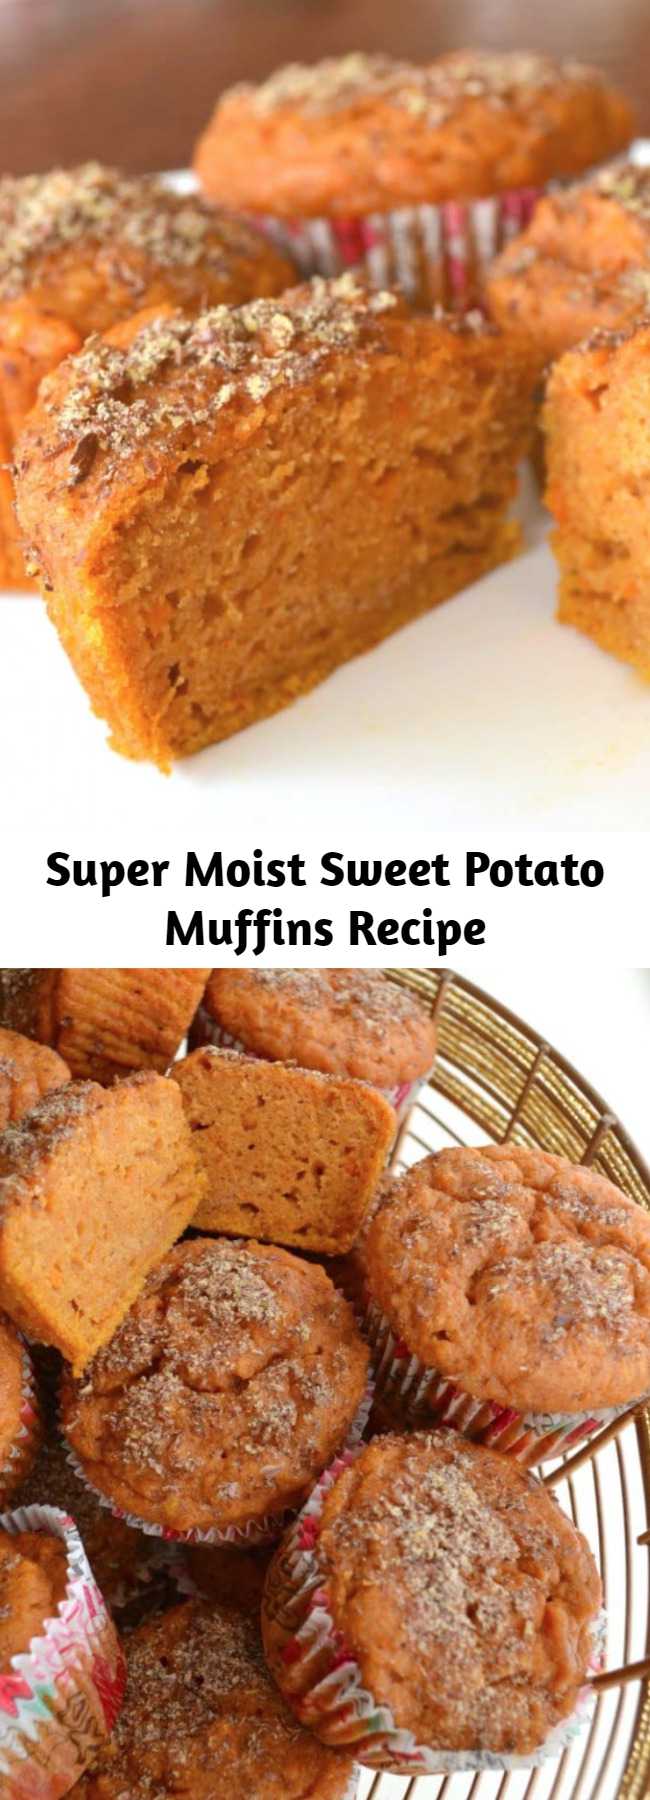 Super Moist Sweet Potato Muffins Recipe - These sweet potato muffins are extremely moist, packed with nutrients, and DELICIOUS! You can feel good about feeding them to your family for breakfast or for a snack.